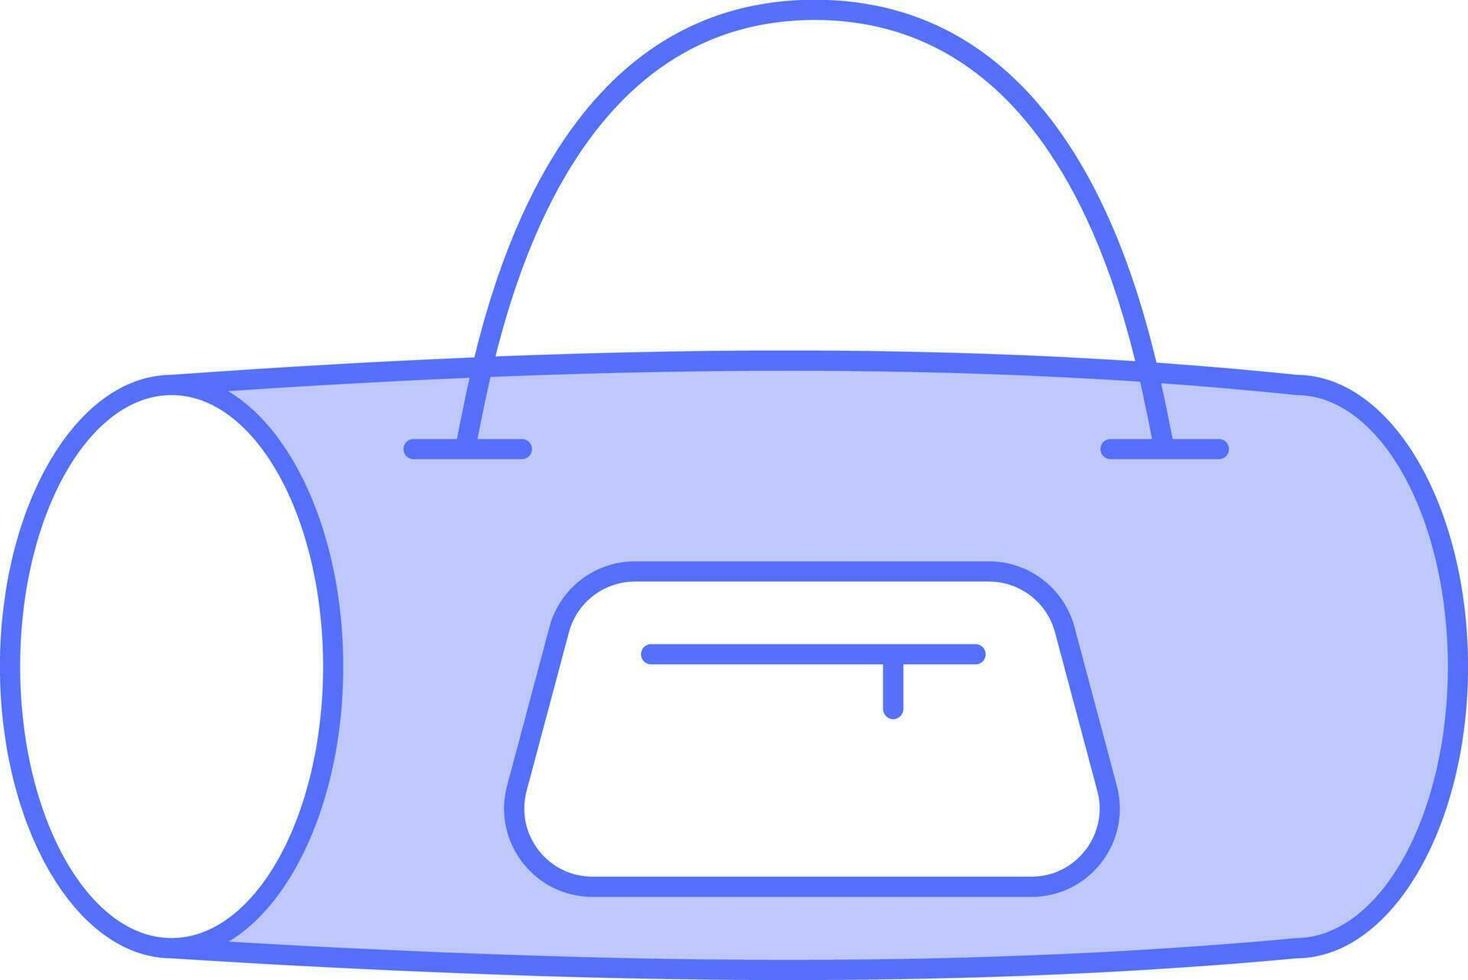 Duffle Bag Icon In Blue And White Color. vector